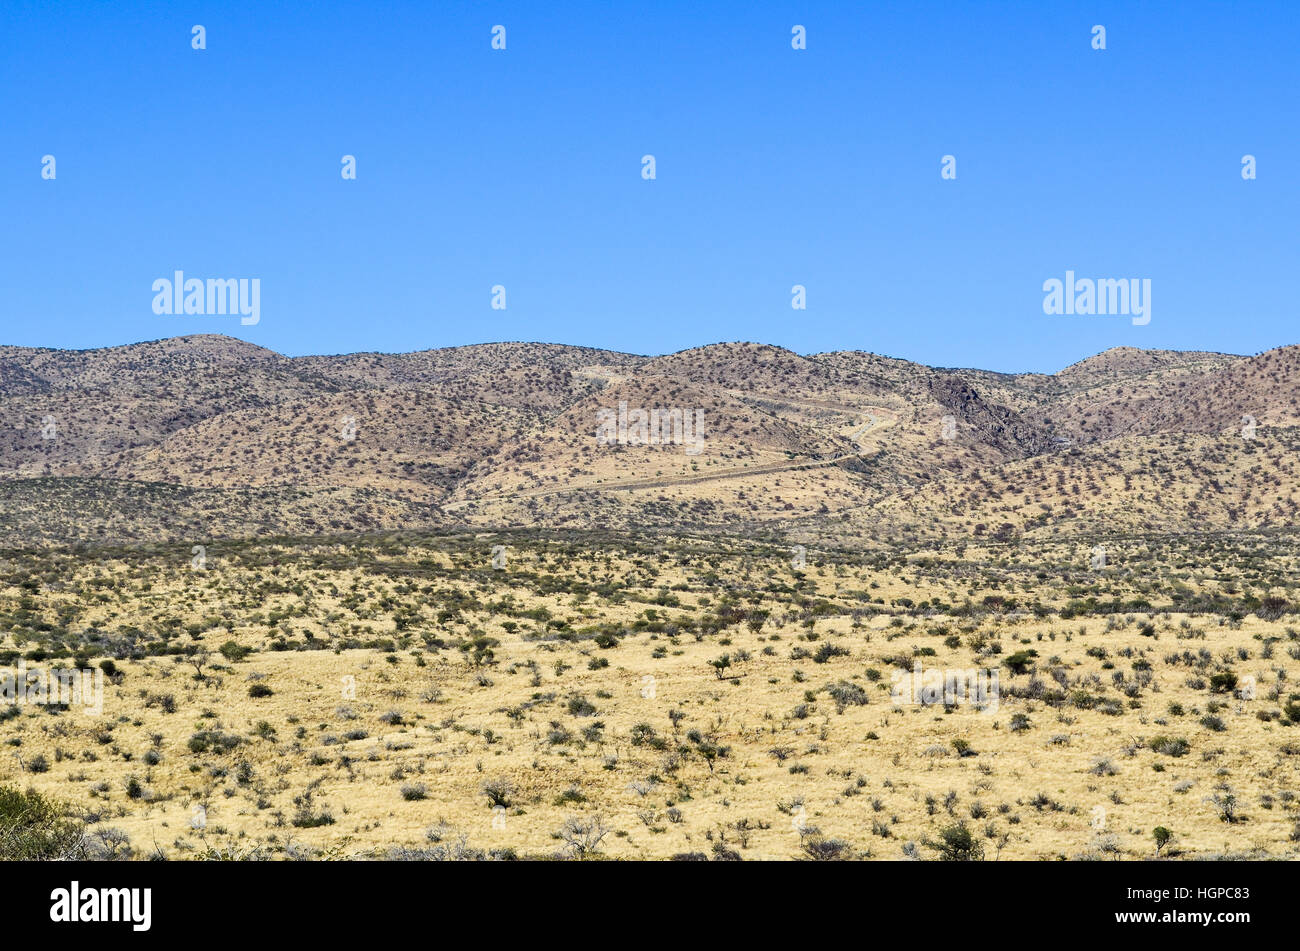 Aerial view of the Khomas highlands, near Windhoek in Namibia Stock Photo